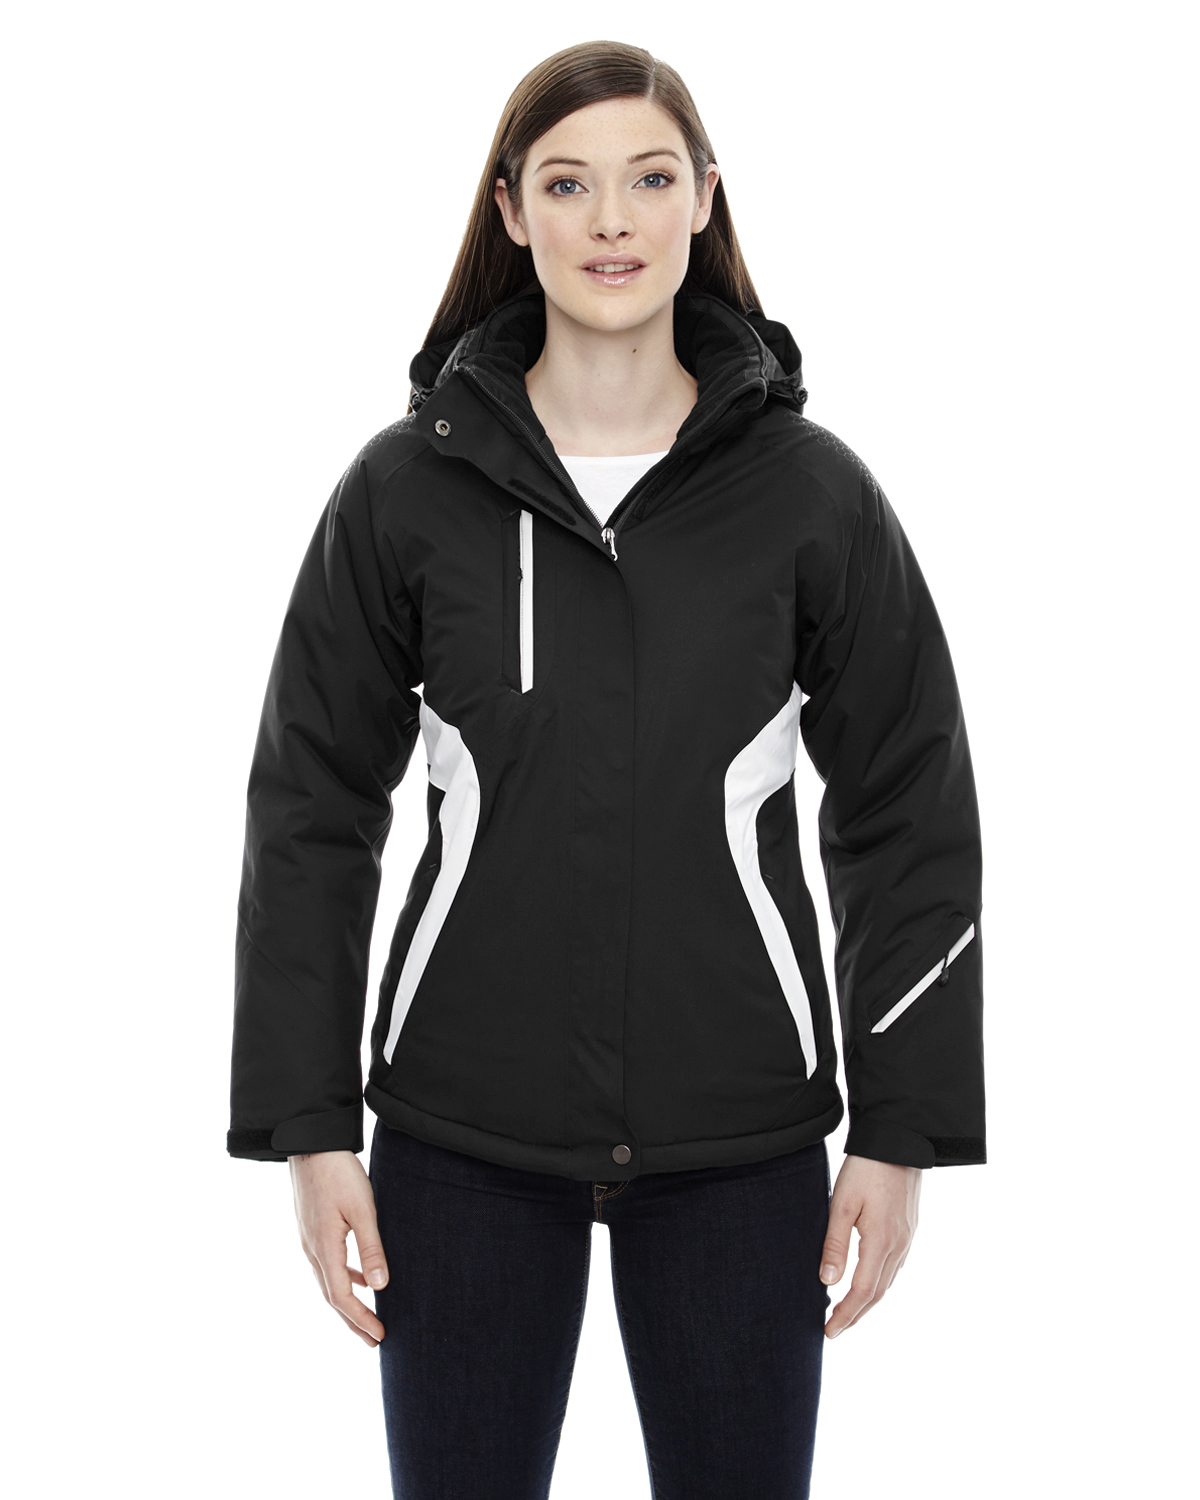 A Product of Ash City - North End Ladies' Apex Seam-Sealed Insulated Jacket - BLACK 703 - XL [Saving and Discount on bulk, Code Christo] - image 1 of 2